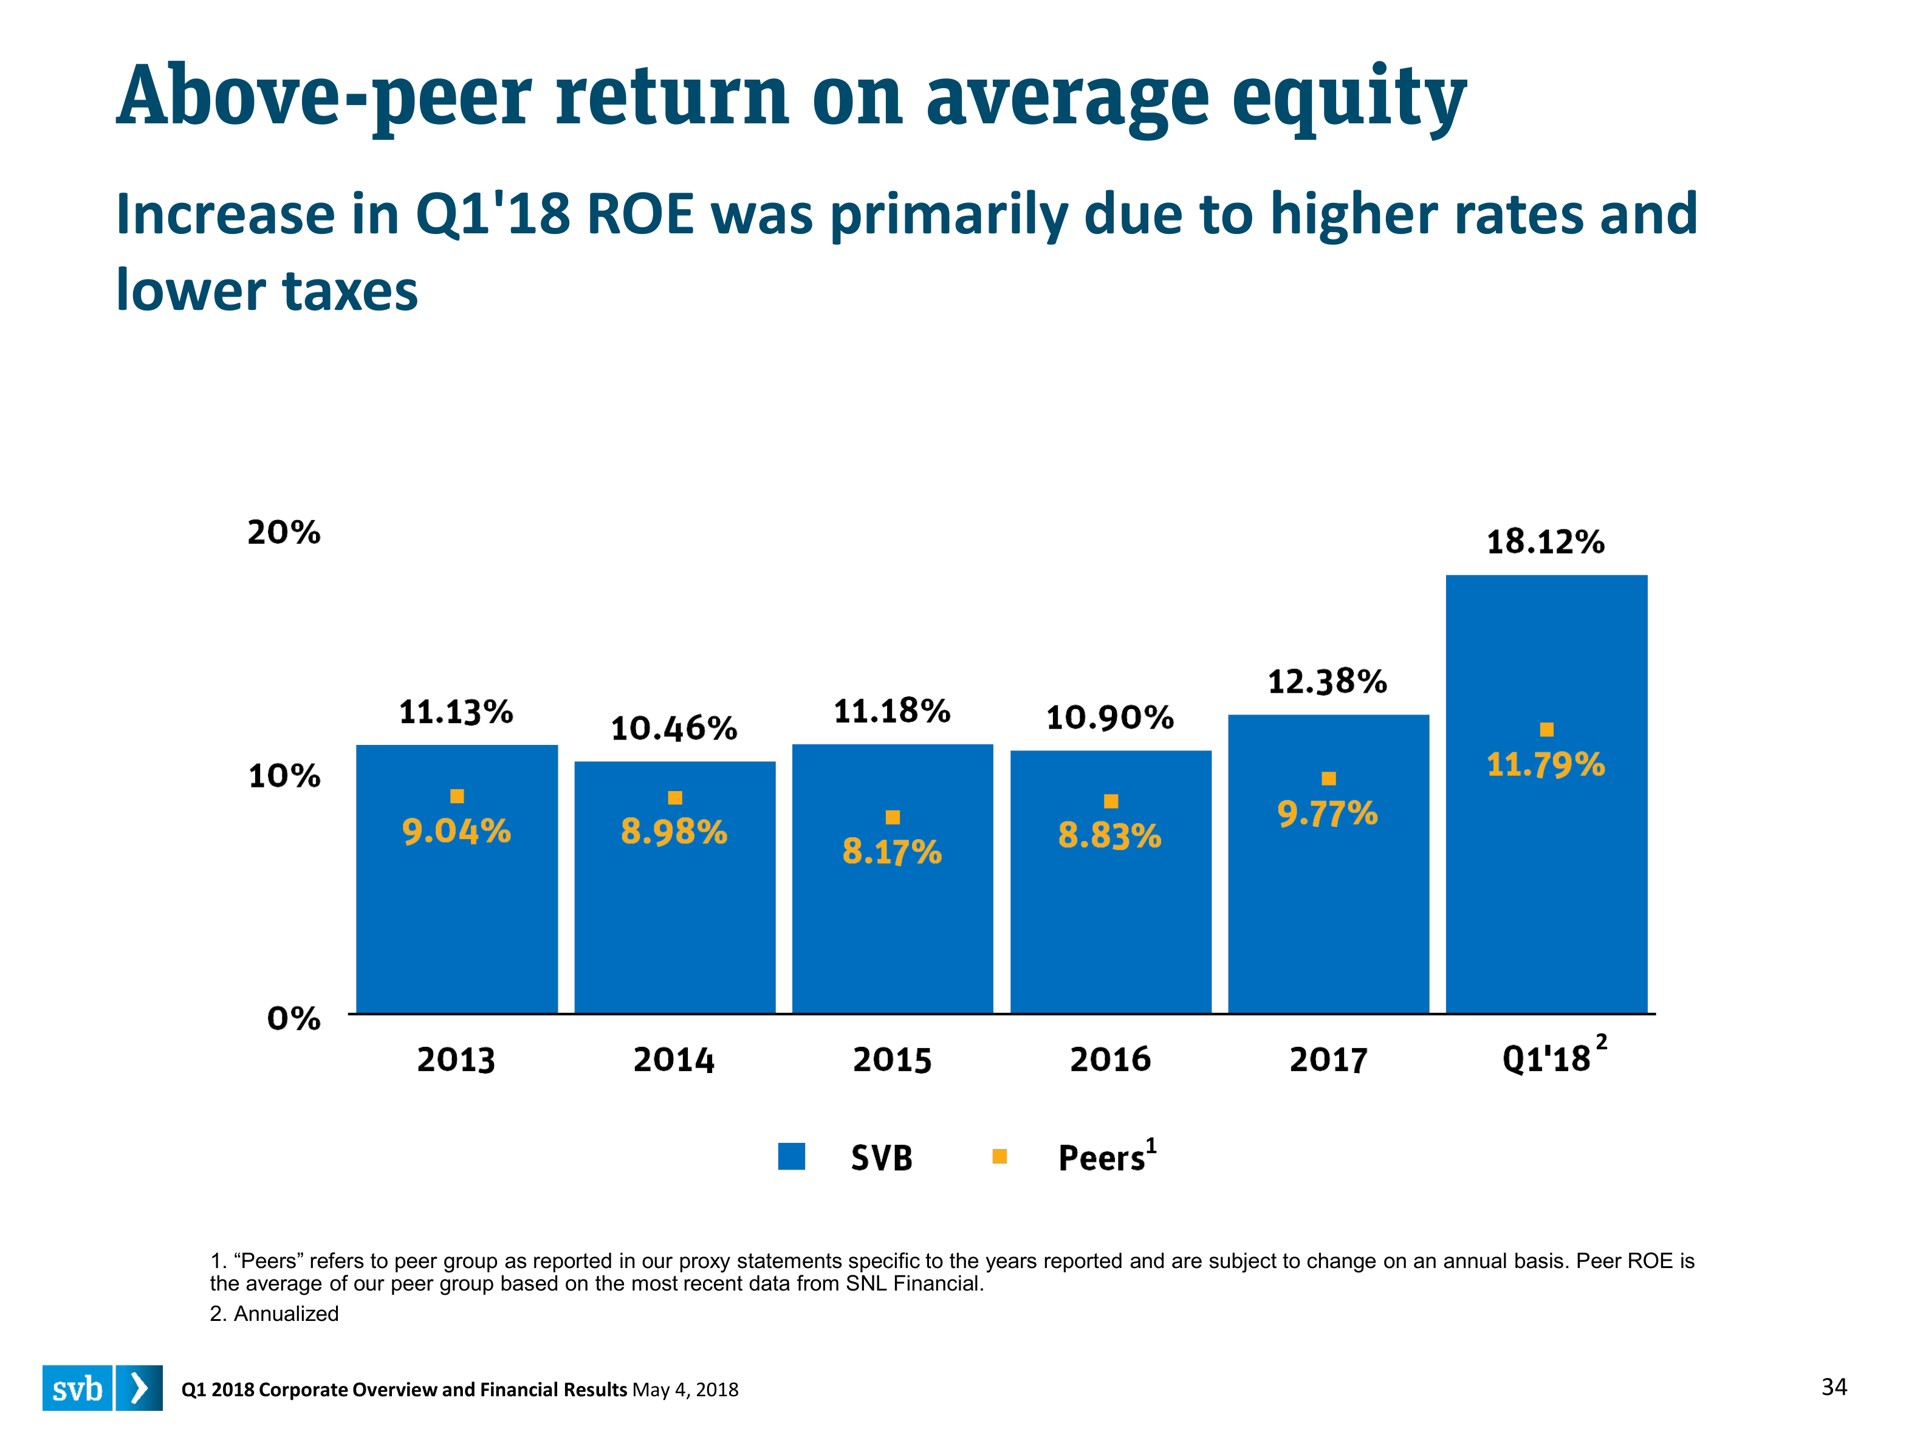 above peer return on average equity increase in roe was primarily due to higher rates and lower taxes | Silicon Valley Bank